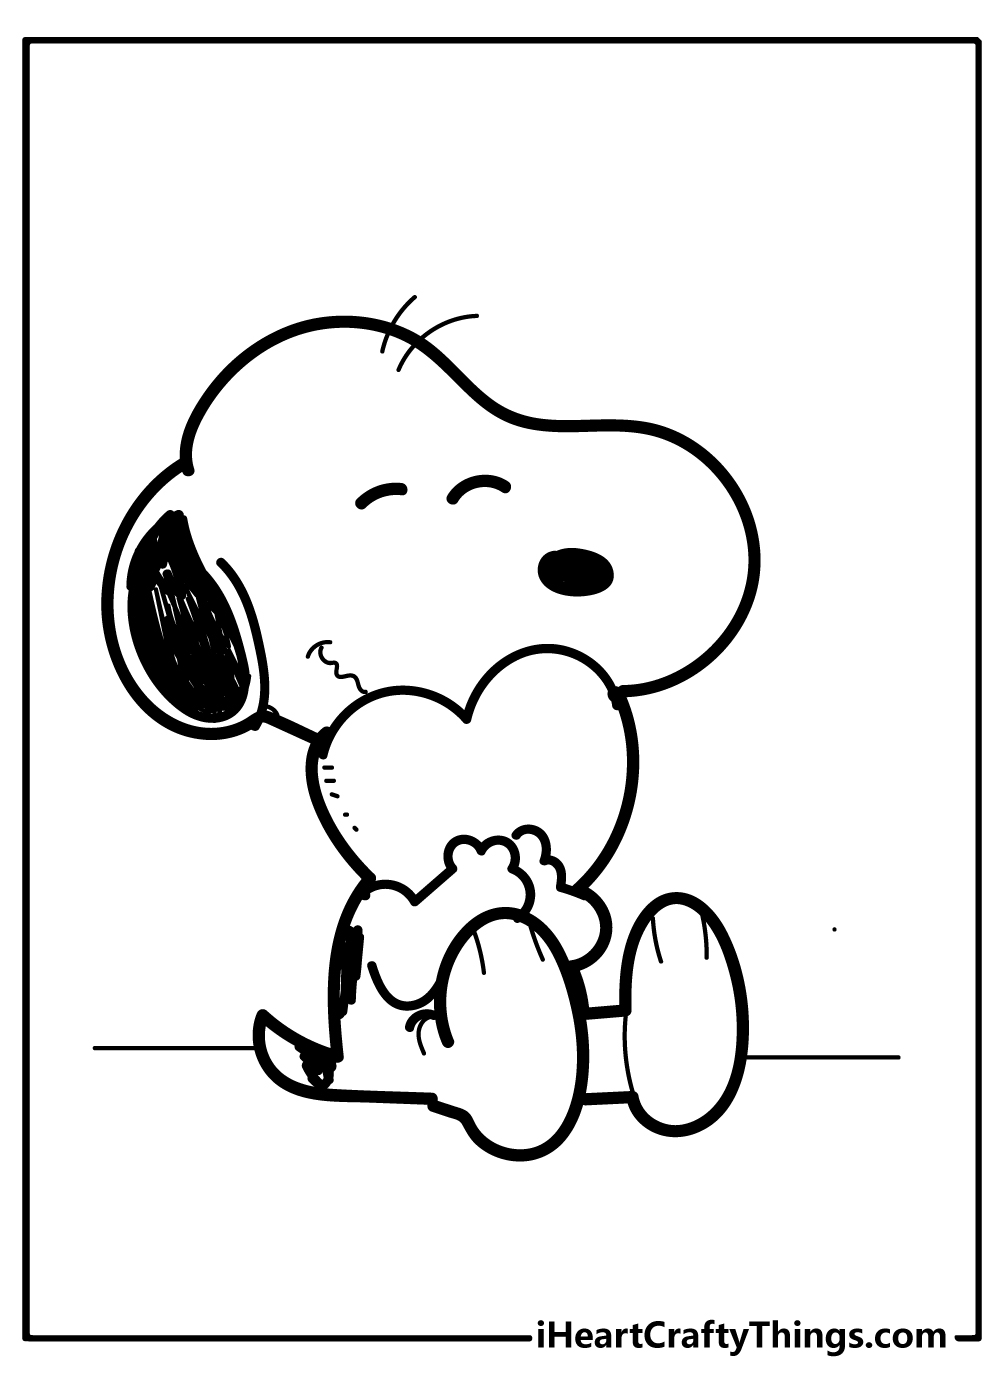 Printable Snoopy Coloring Pages Updated 20